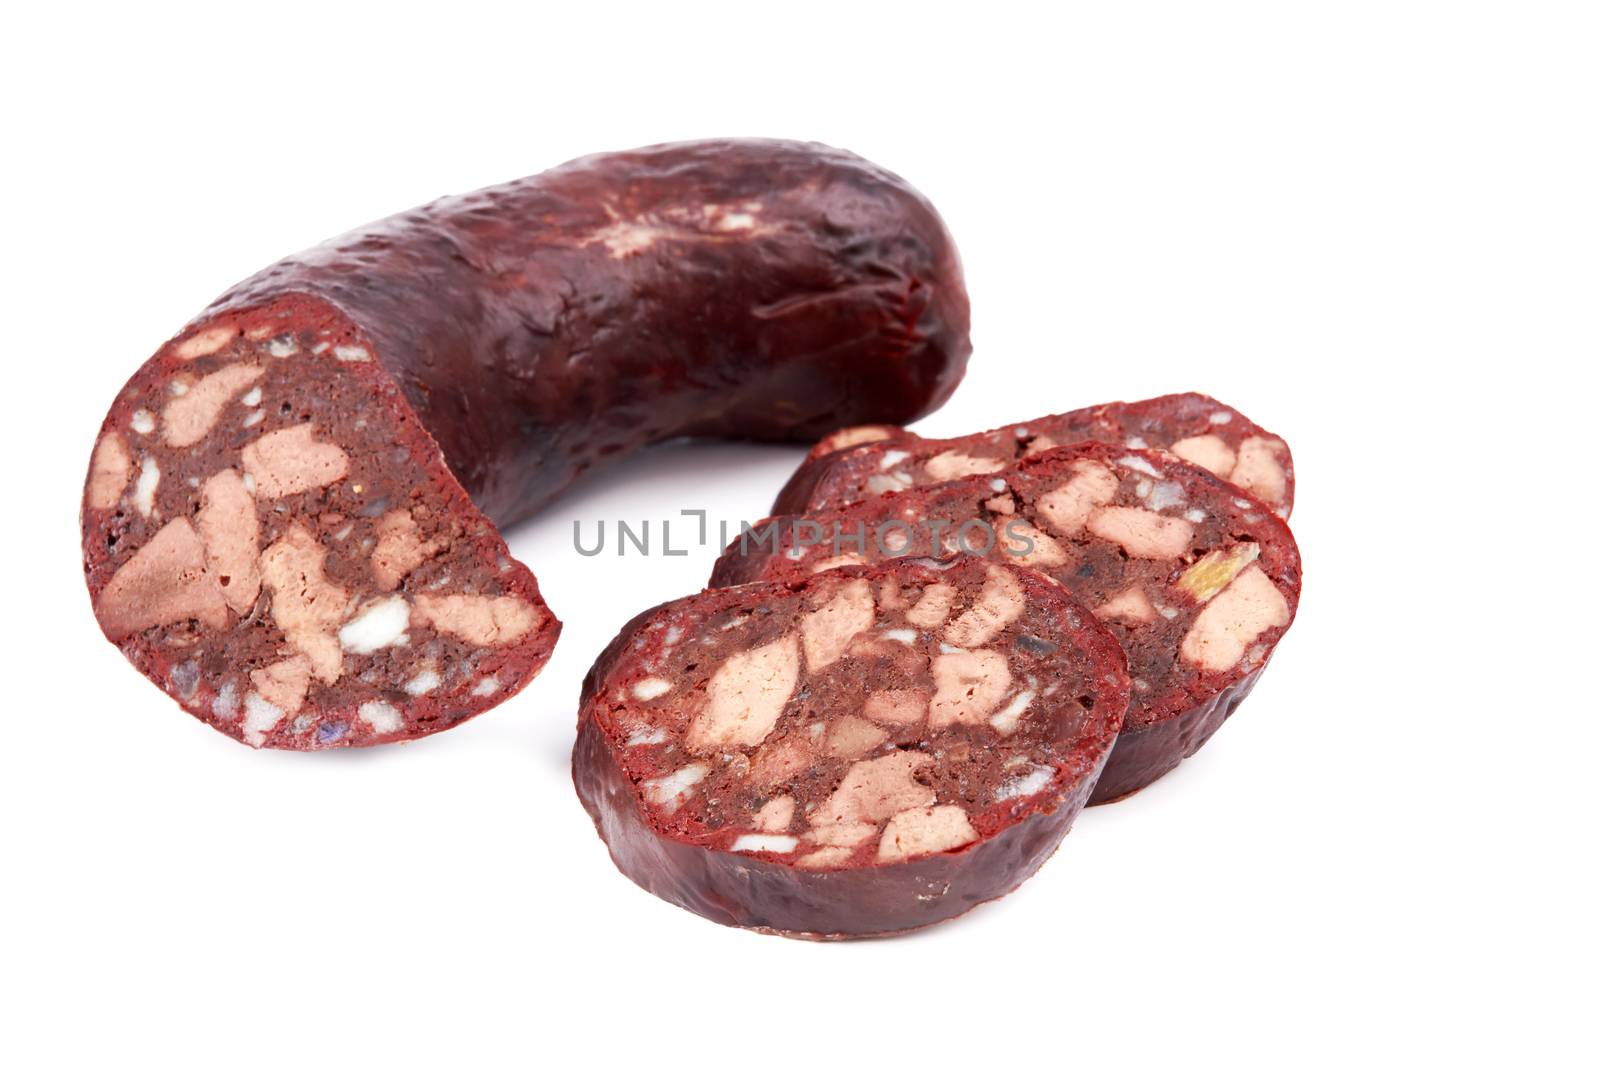 Home made blood sausage on a white plate background 